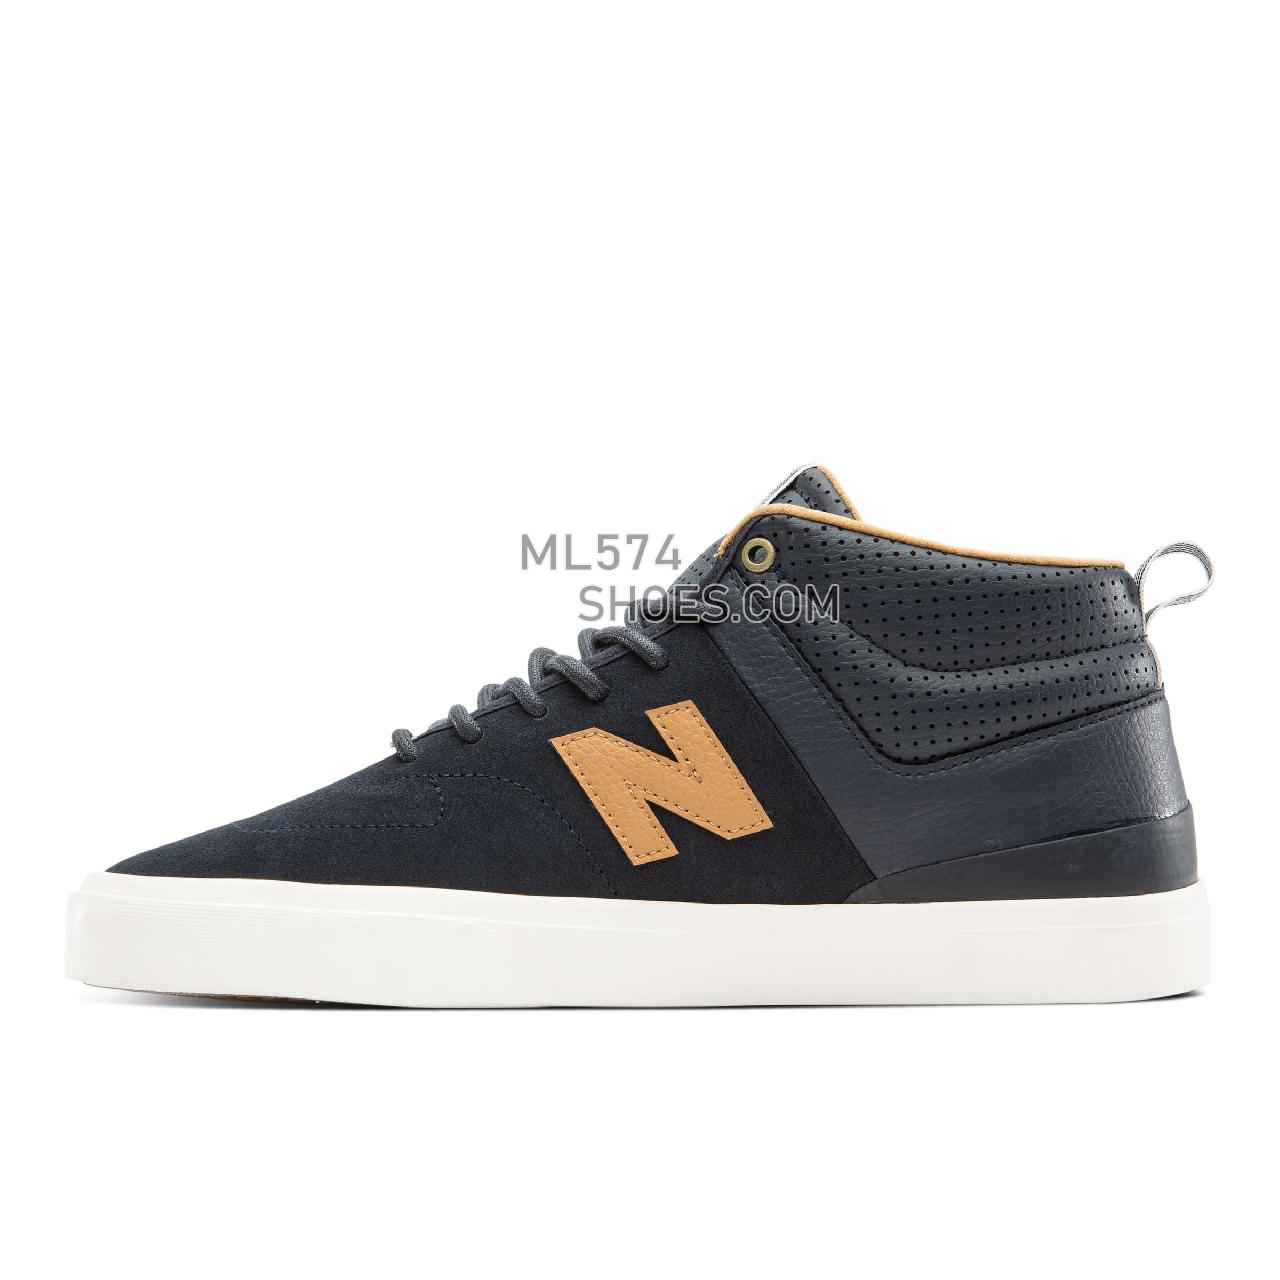 New Balance Numeric NM379 Mid - Men's NB Numeric Skate - Navy with Brown - NM379MSO